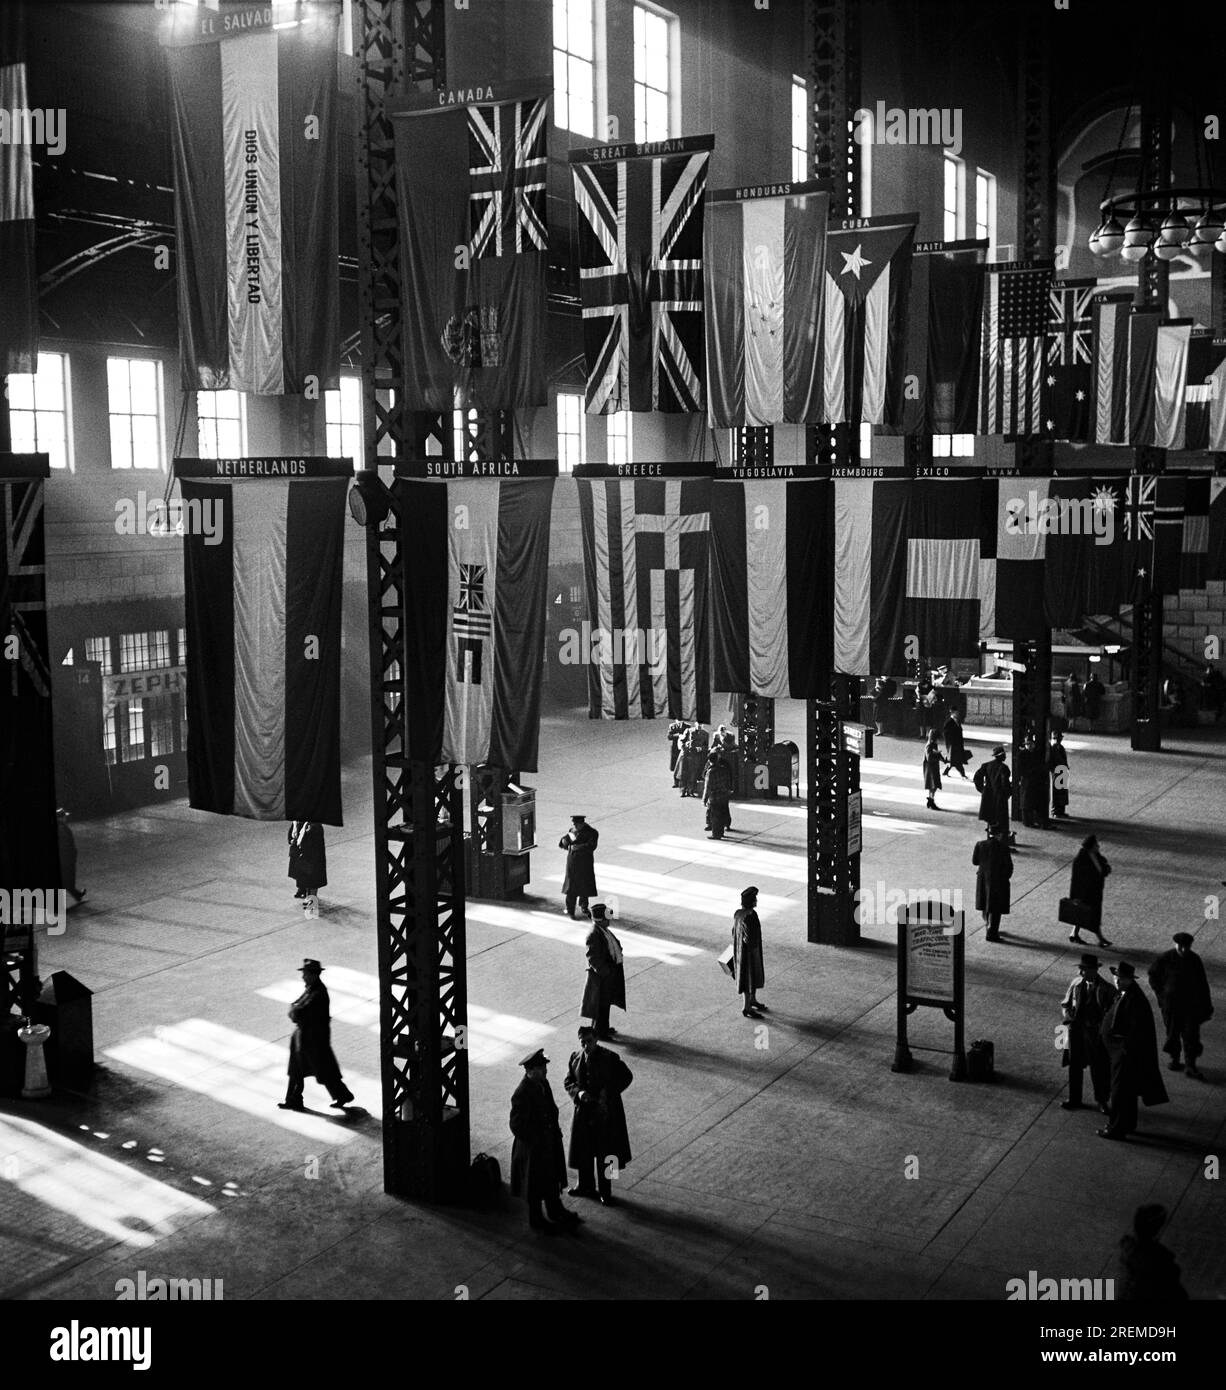 Chicago, Illinois:    January, 1943 The Union Station concourse with the flags of various countries hanging from the ceiling. Stock Photo